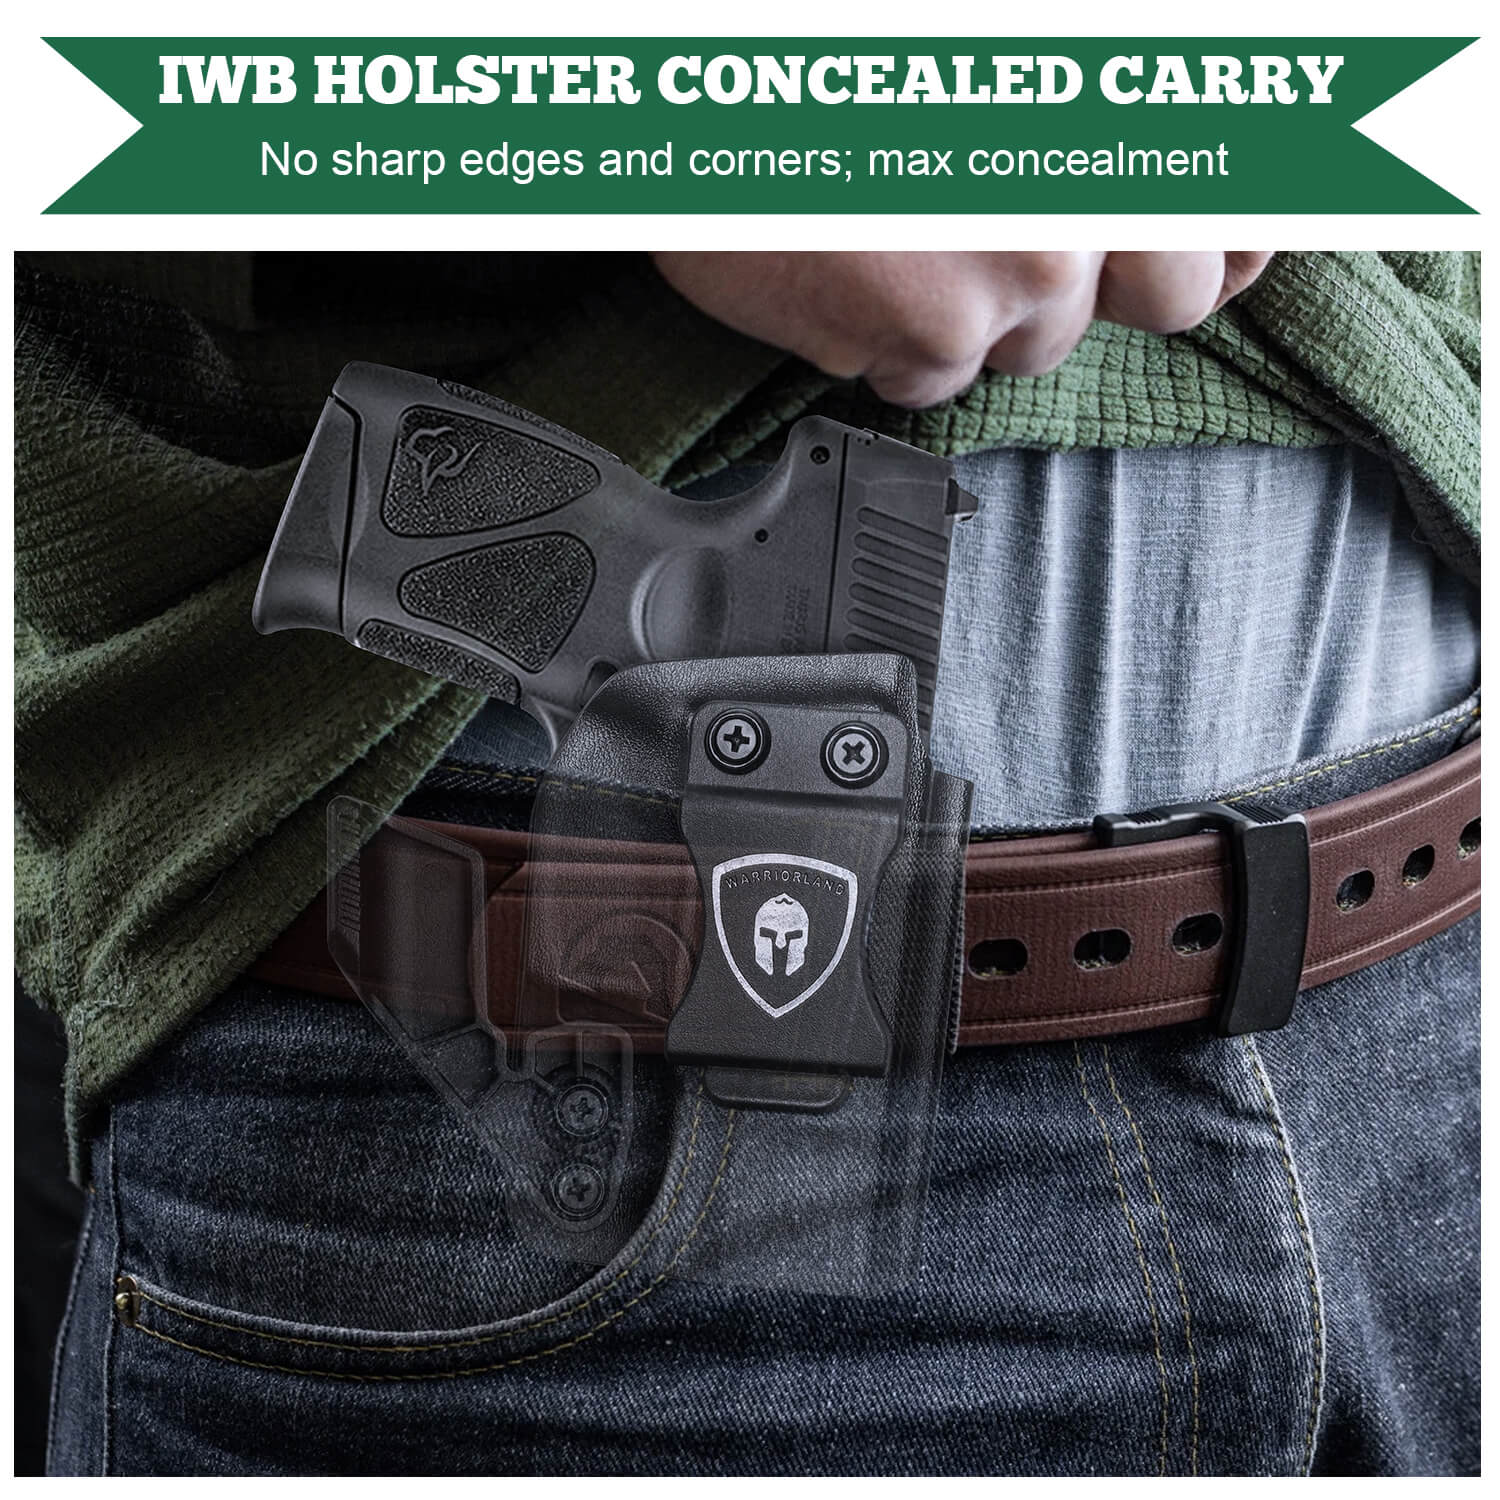  2 Pack Universal IWB Gun Holster for Concealed Carry, Inside  The Waistband Pistols Holsters, Fits All Firearms S&W M&P Shield 9/40  Taurus PT111 G2 Sig Sauer P320 Glock 17 19 26 27 42 43 : Sports & Outdoors